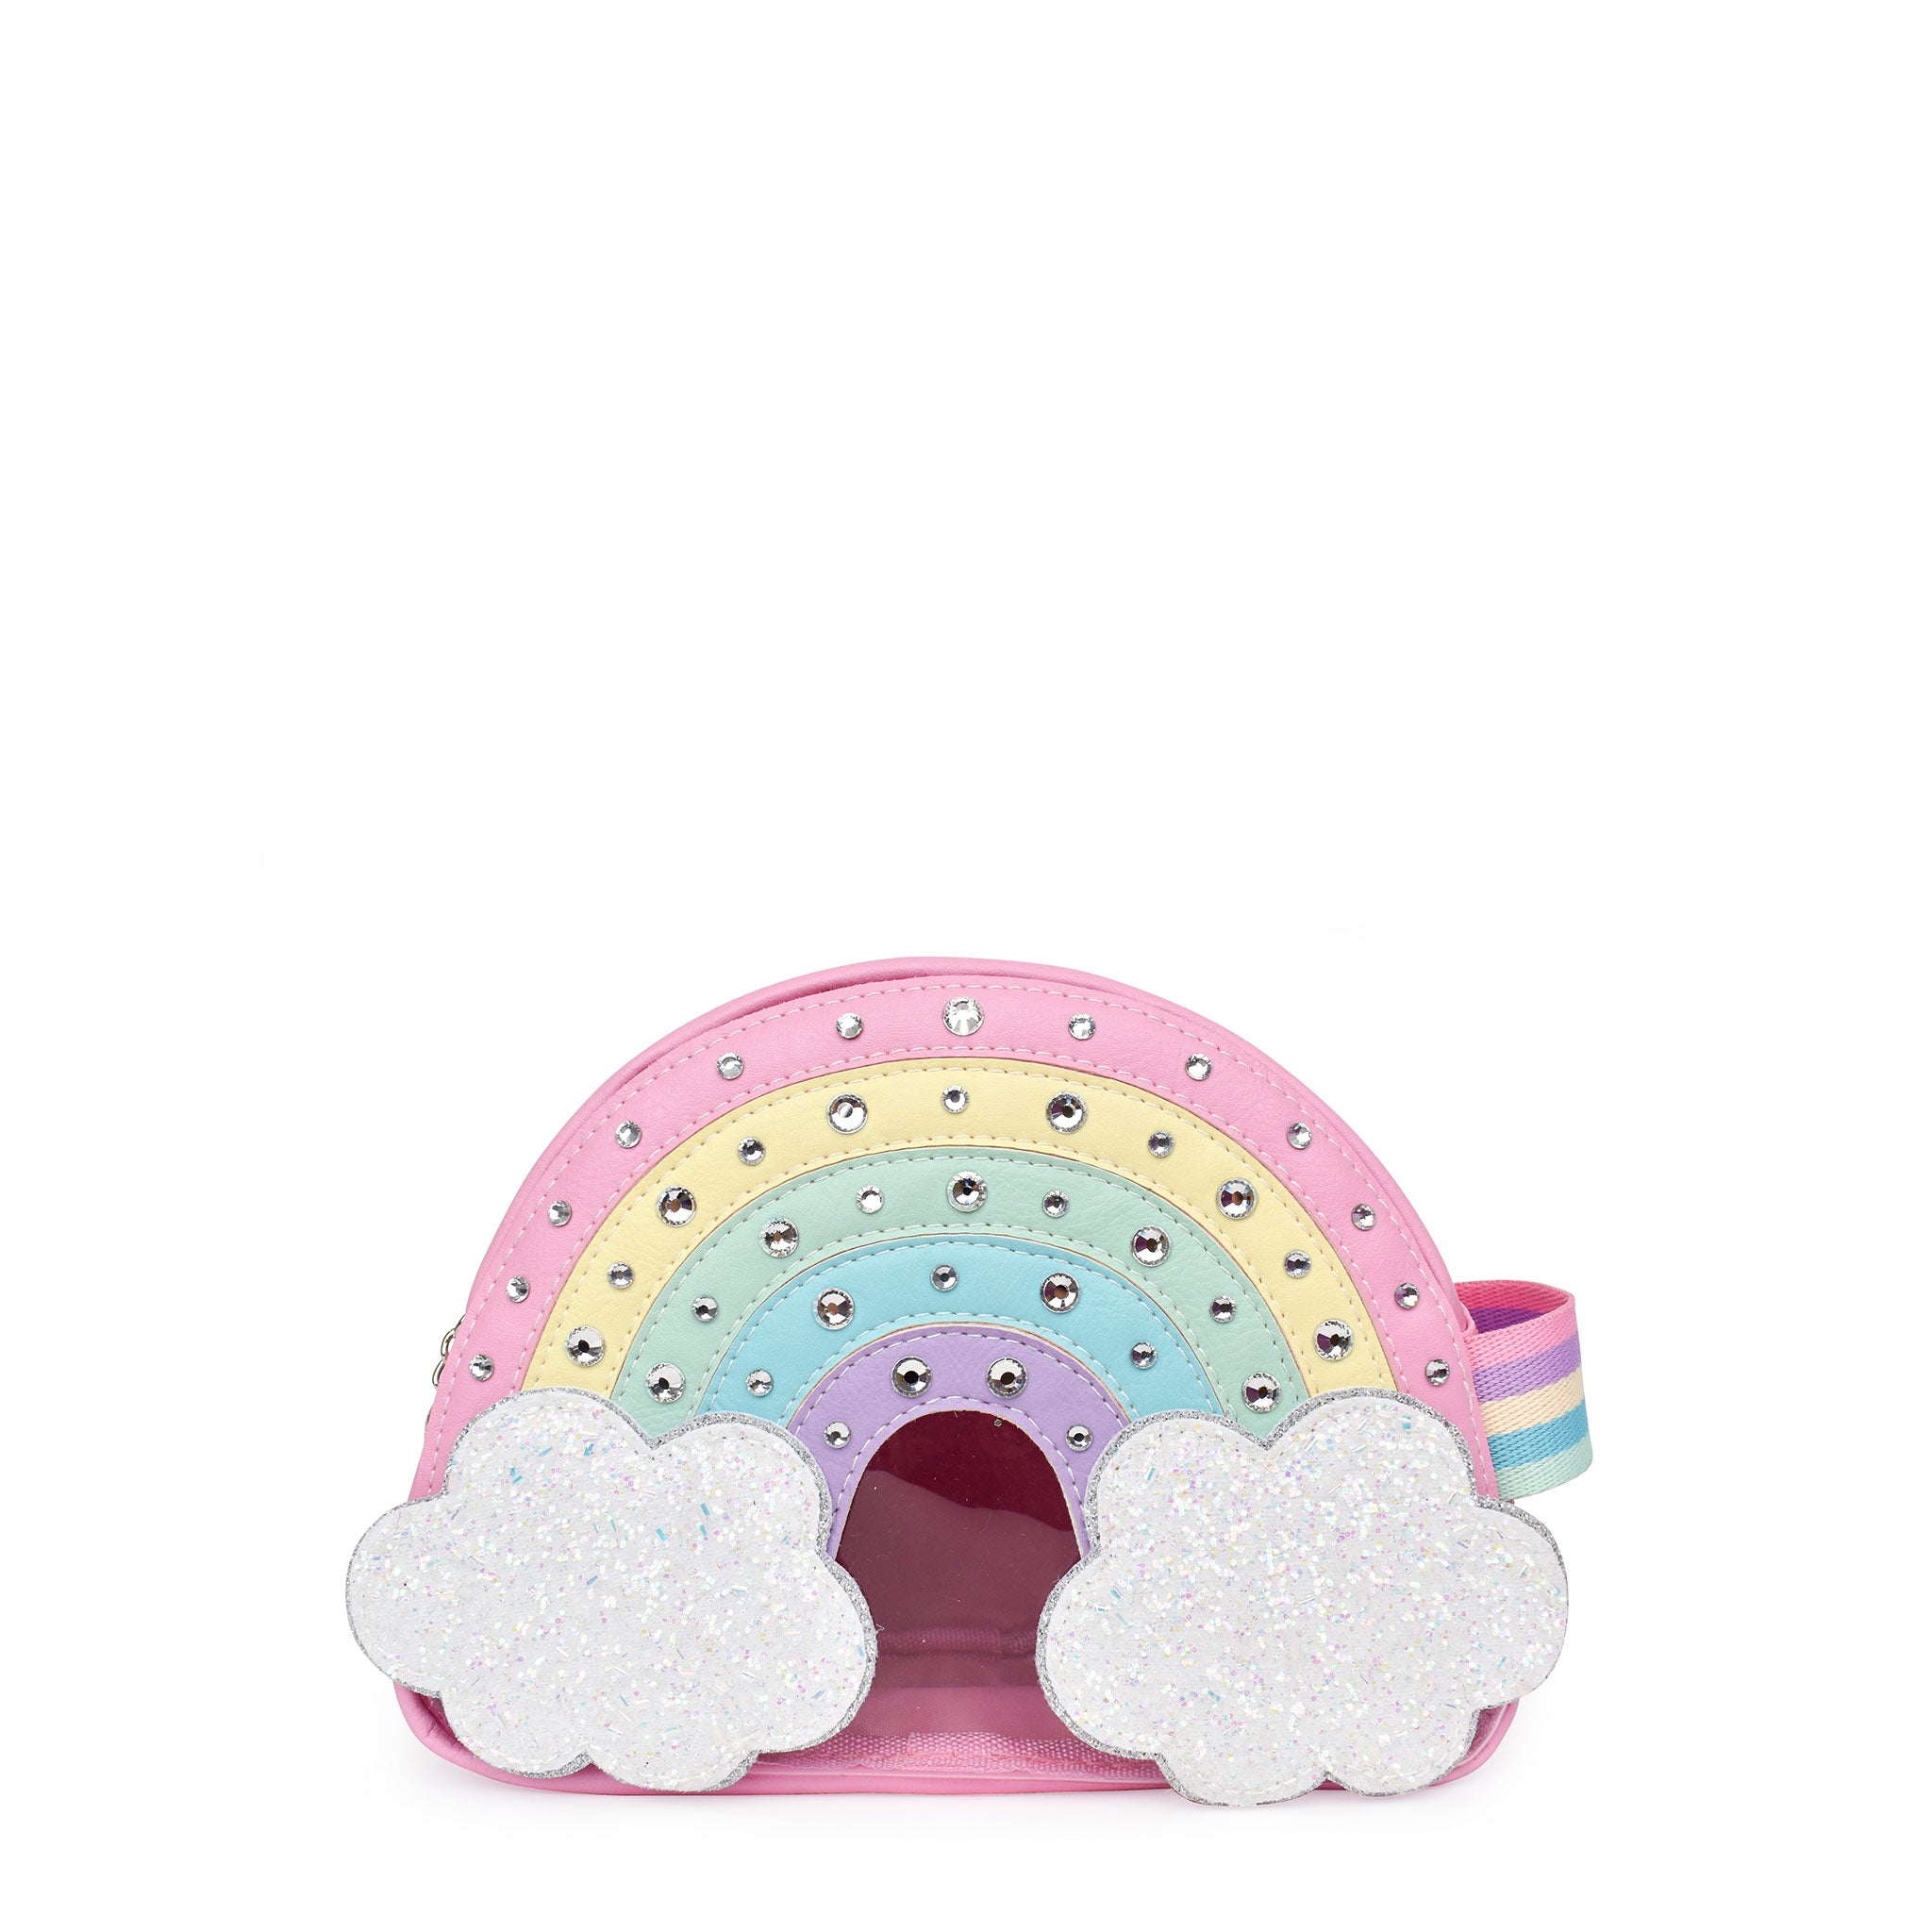 Front view of rainbow shaped chear pouch embellished with rhinestones